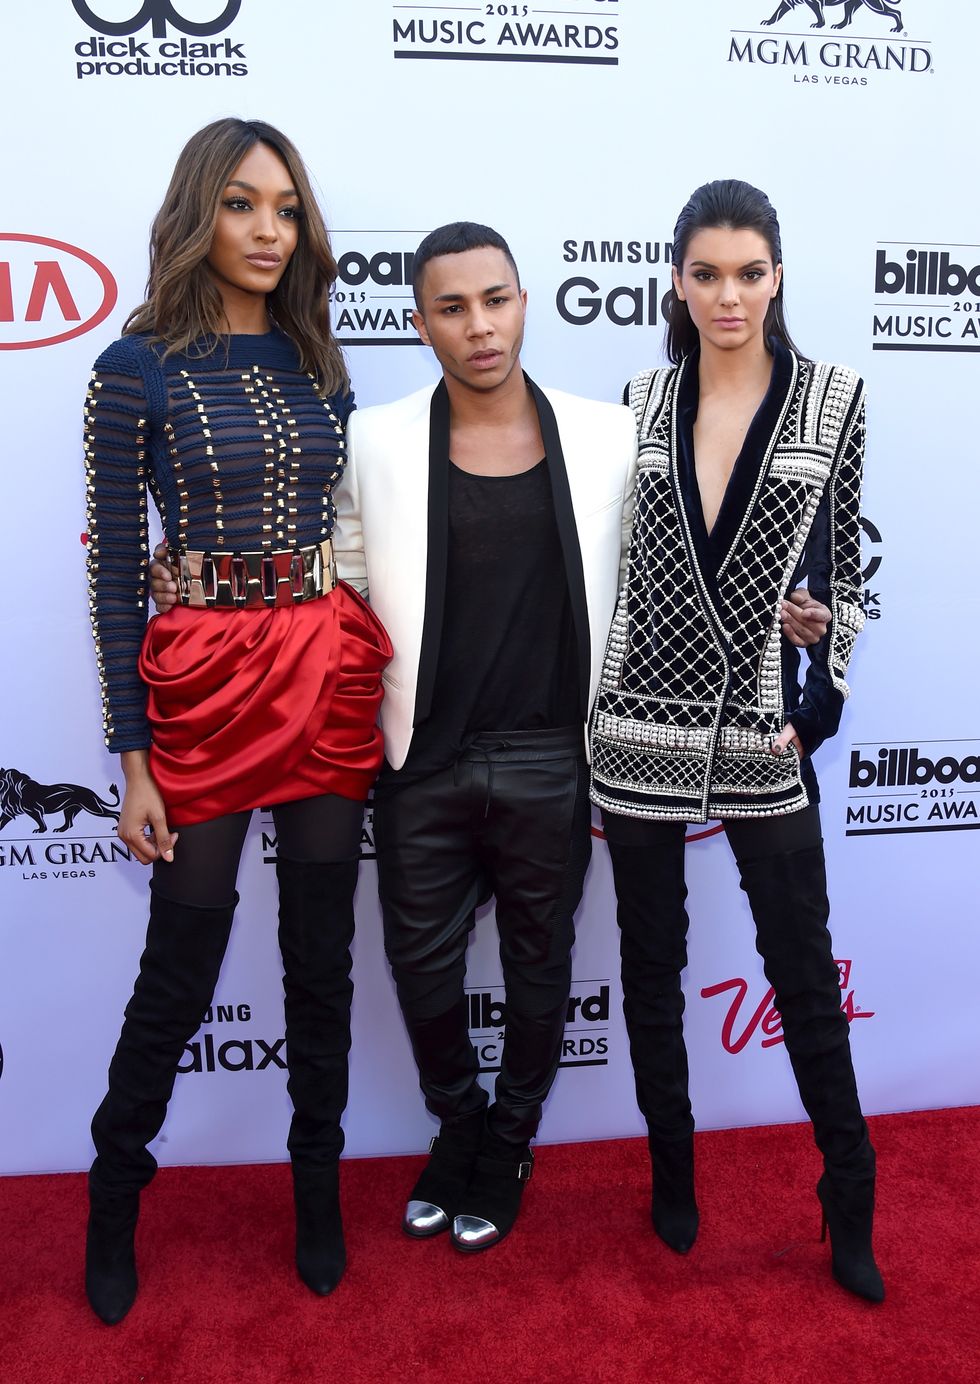 Jourdan Dunn, Olivier Rousteing and Kendall Jenner at the 2015 Billboard Music Awards